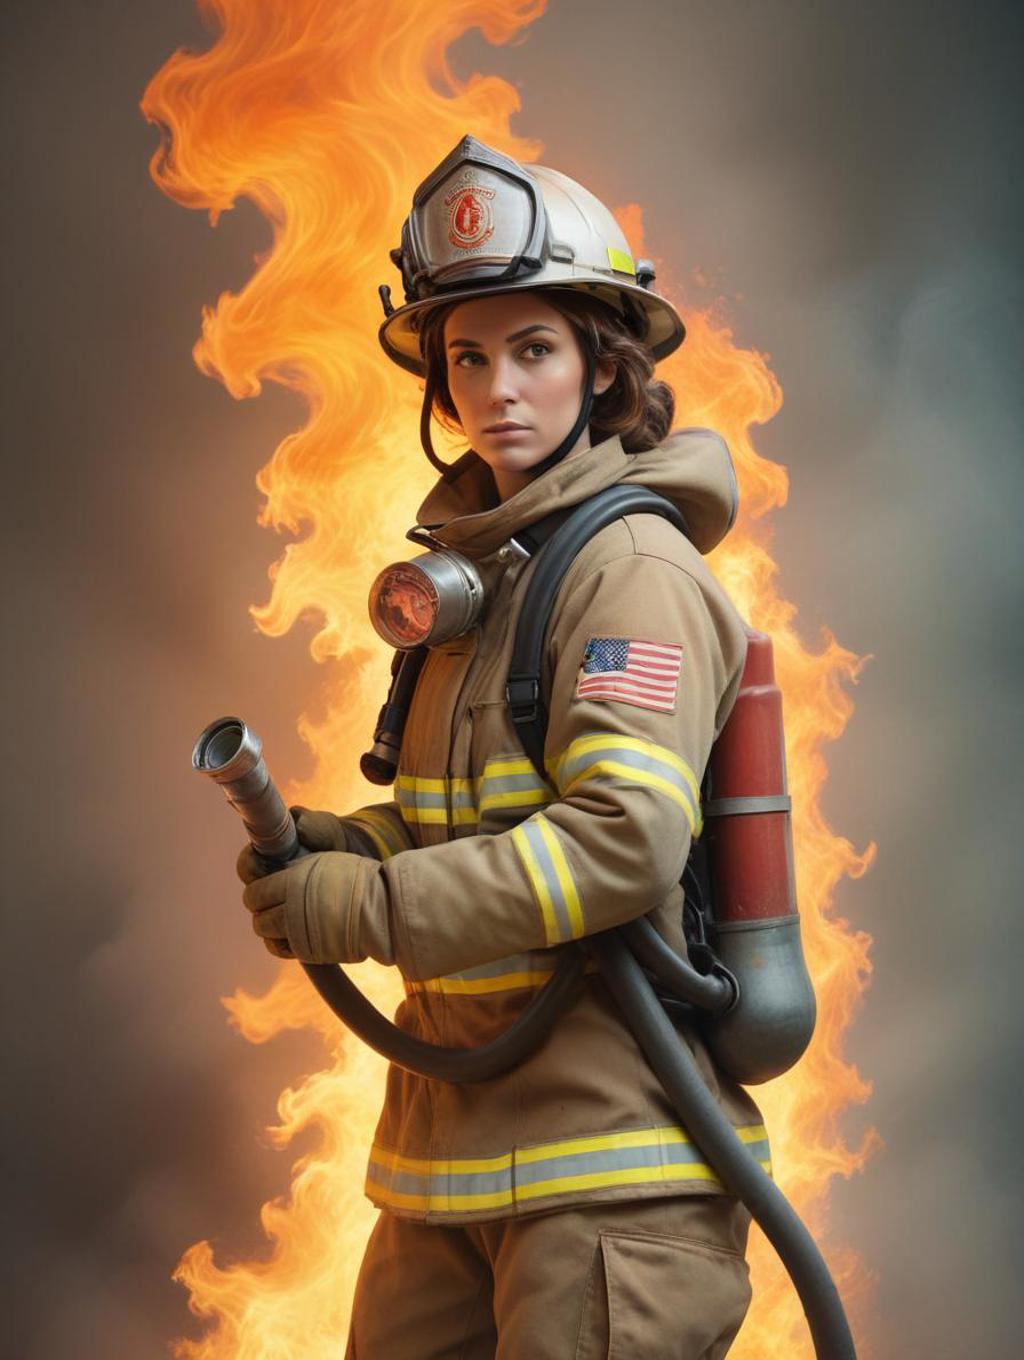 Fire Fighters Women: Portrait Photography & Wall Frames-Theme:2